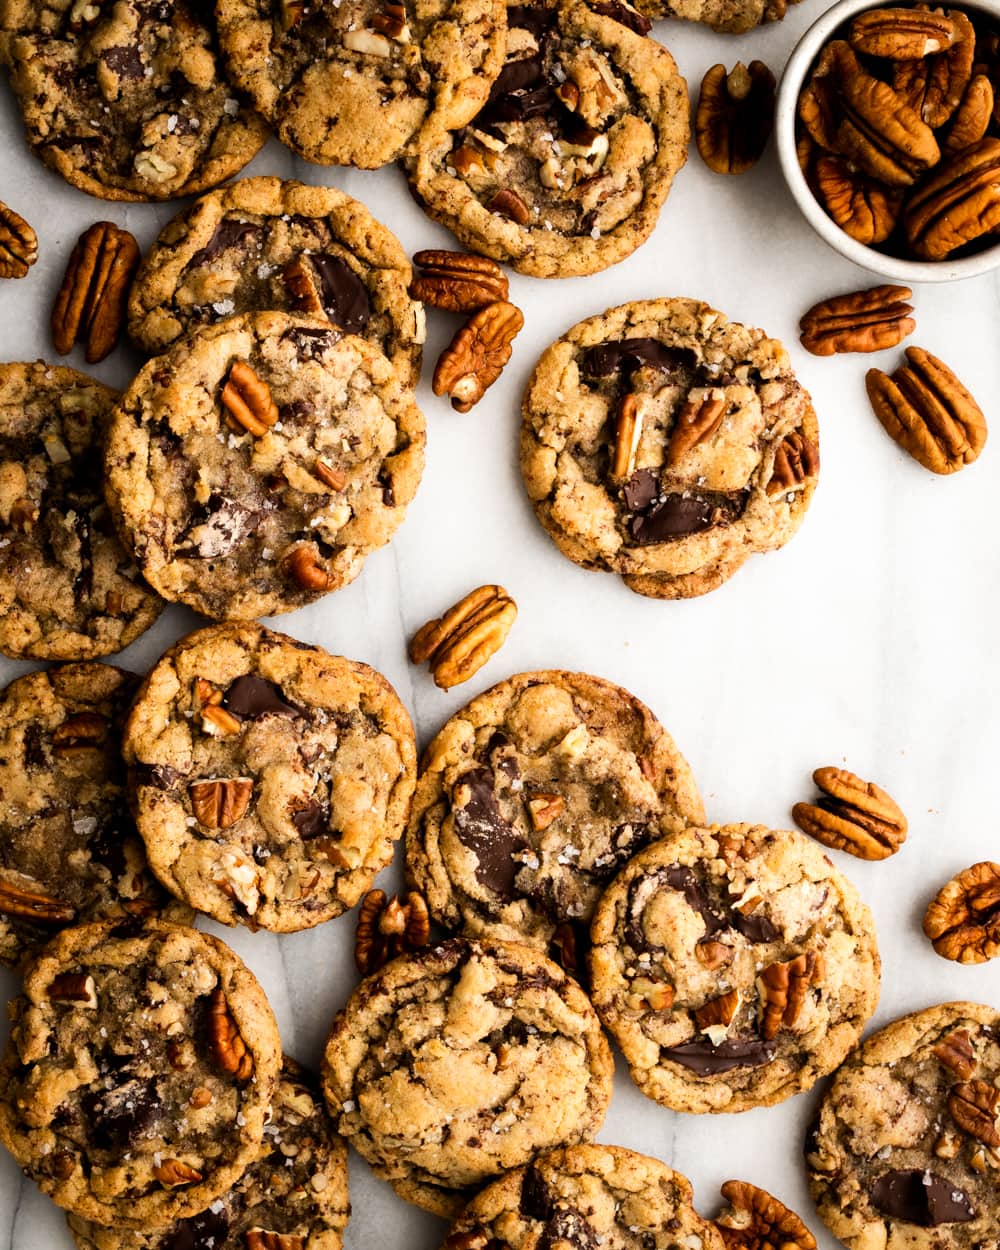 https://asassyspoon.com/wp-content/uploads/chewy-pecan-chocolate-chip-cookies-a-sassy-spoon-4.jpg